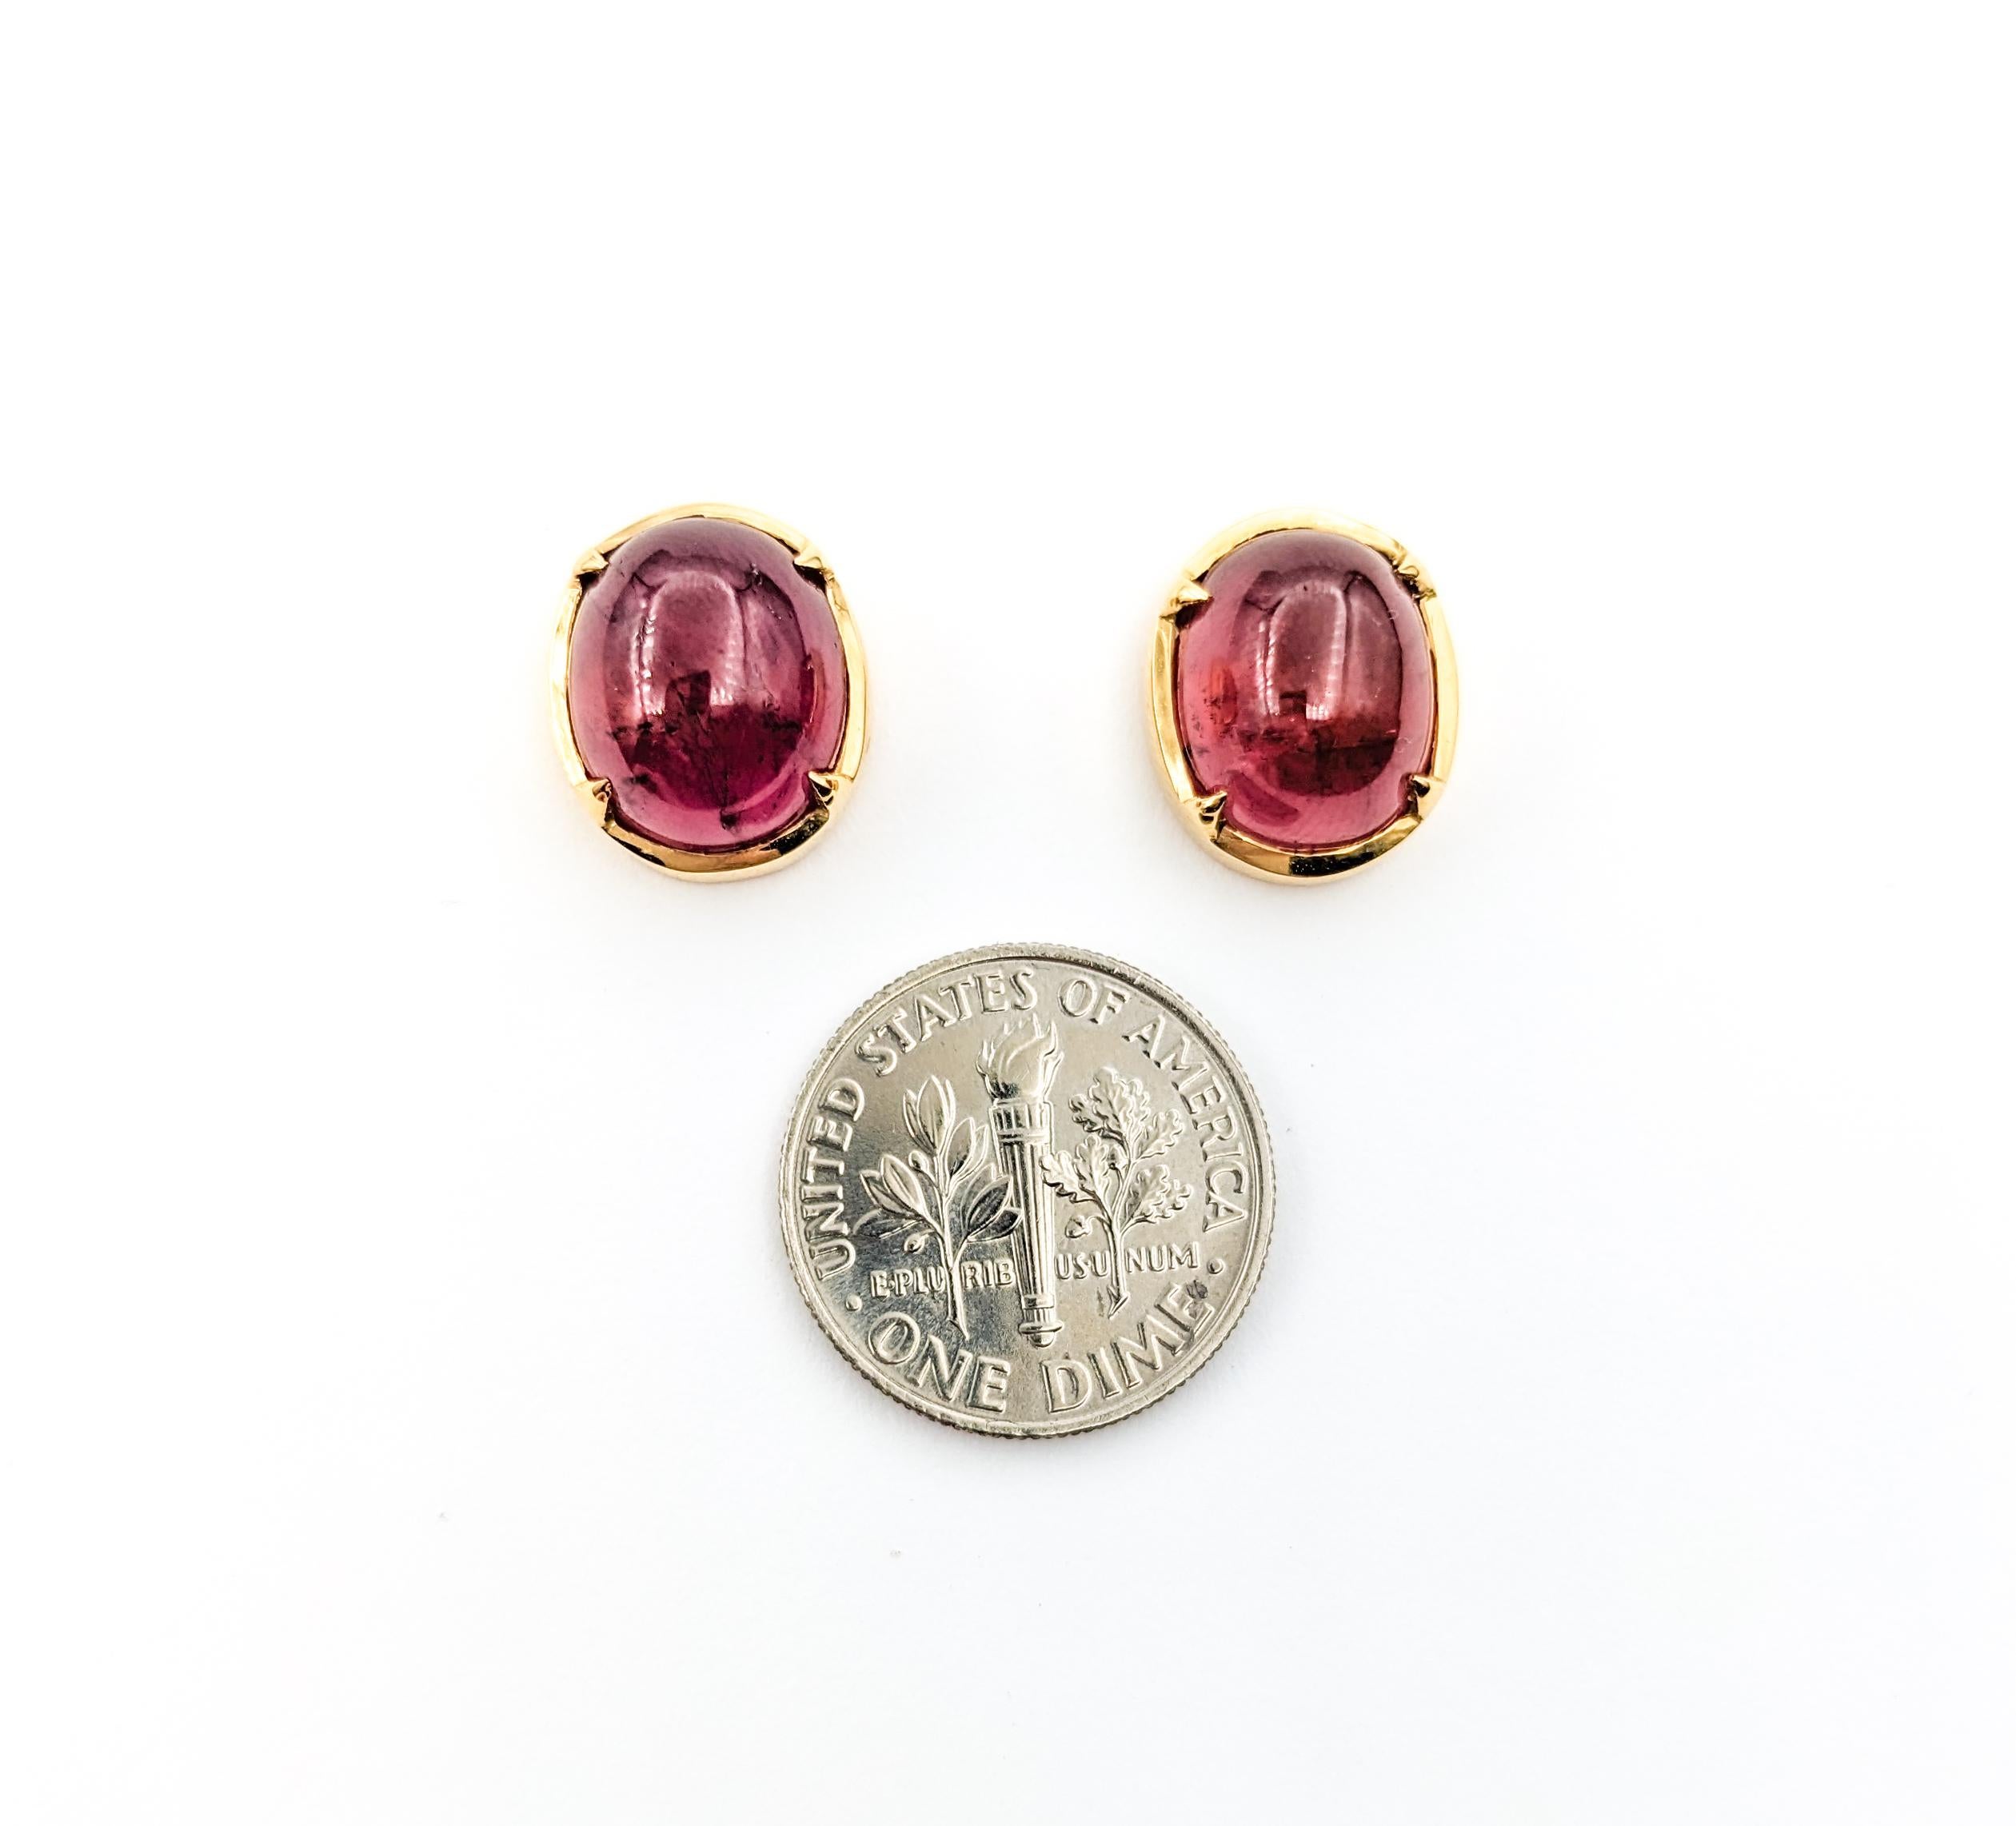 15.5ctw Cabochon Pink Tourmaline Earrings In Yellow Gold


These captivating earrings are masterfully crafted from 18kt yellow gold, featuring an impressive 15.5ctw of cabochon pink tourmaline. These luscious pink tourmalines stand out with their